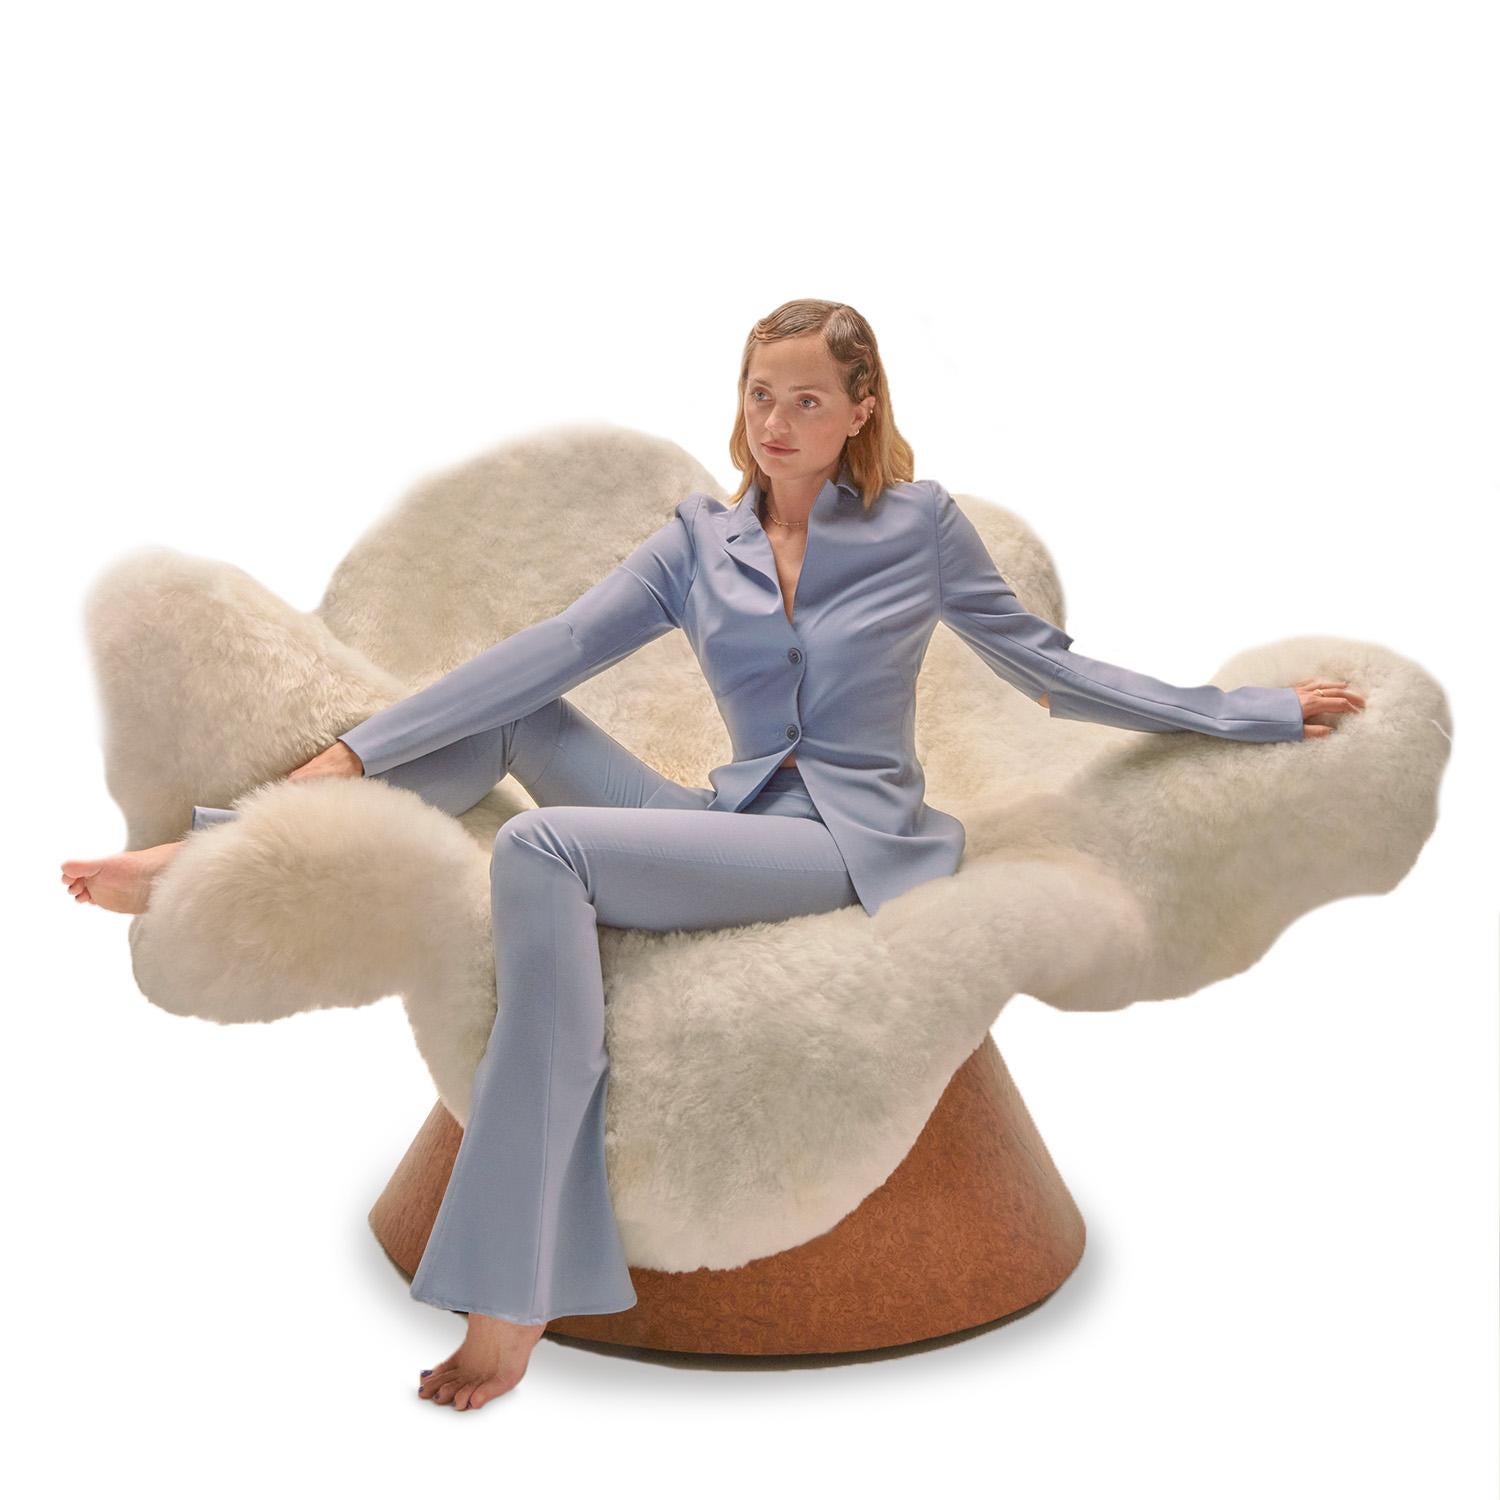 Contemporary Anemone Chair, Alpaca Fur & Wood by Brandi Howe, Represented by Tuleste Factory For Sale